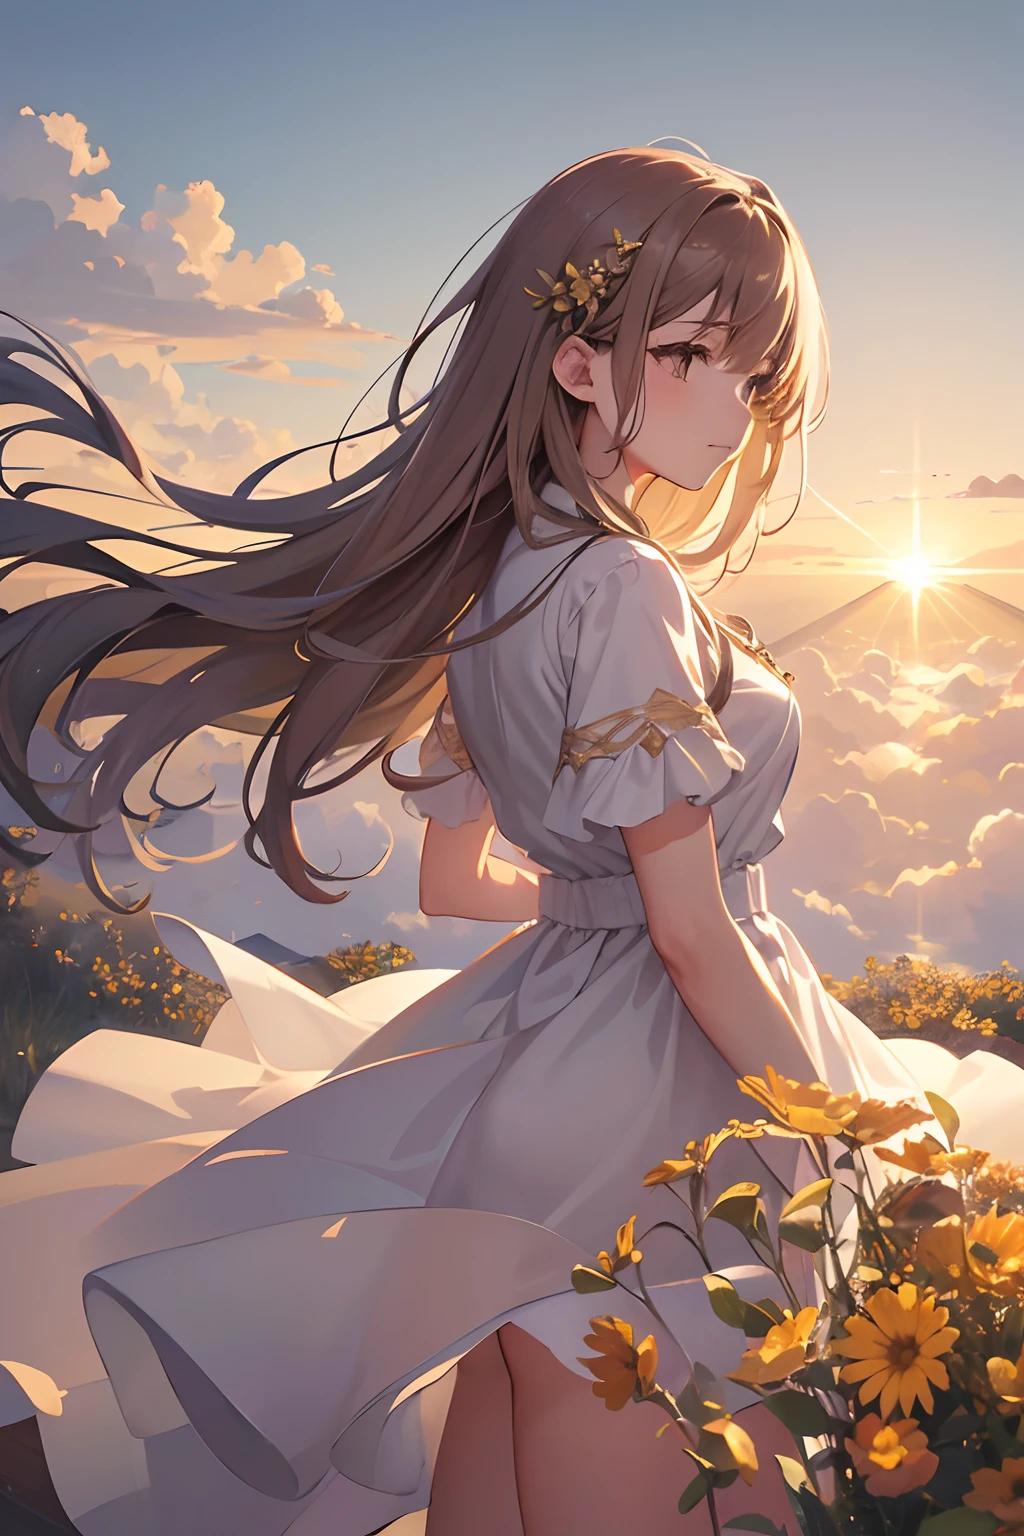 Create an illustration capturing the breathtaking view of a sea of clouds during sunrise from a mountaintop. The sky is painted in hues of gold, casting a warm and ethereal glow over the entire scene. The clouds below, gently illuminated by the morning light, create a serene and peaceful atmosphere. The illustration should exude a nostalgic ambiance, transporting viewers to a time of quiet contemplation and natural beauty. Every detail, from the soft colors of the sky to the gentle texture of the clouds, should be depicted with precision, evoking a sense of awe and tranquility as one gazes upon this majestic morning vista